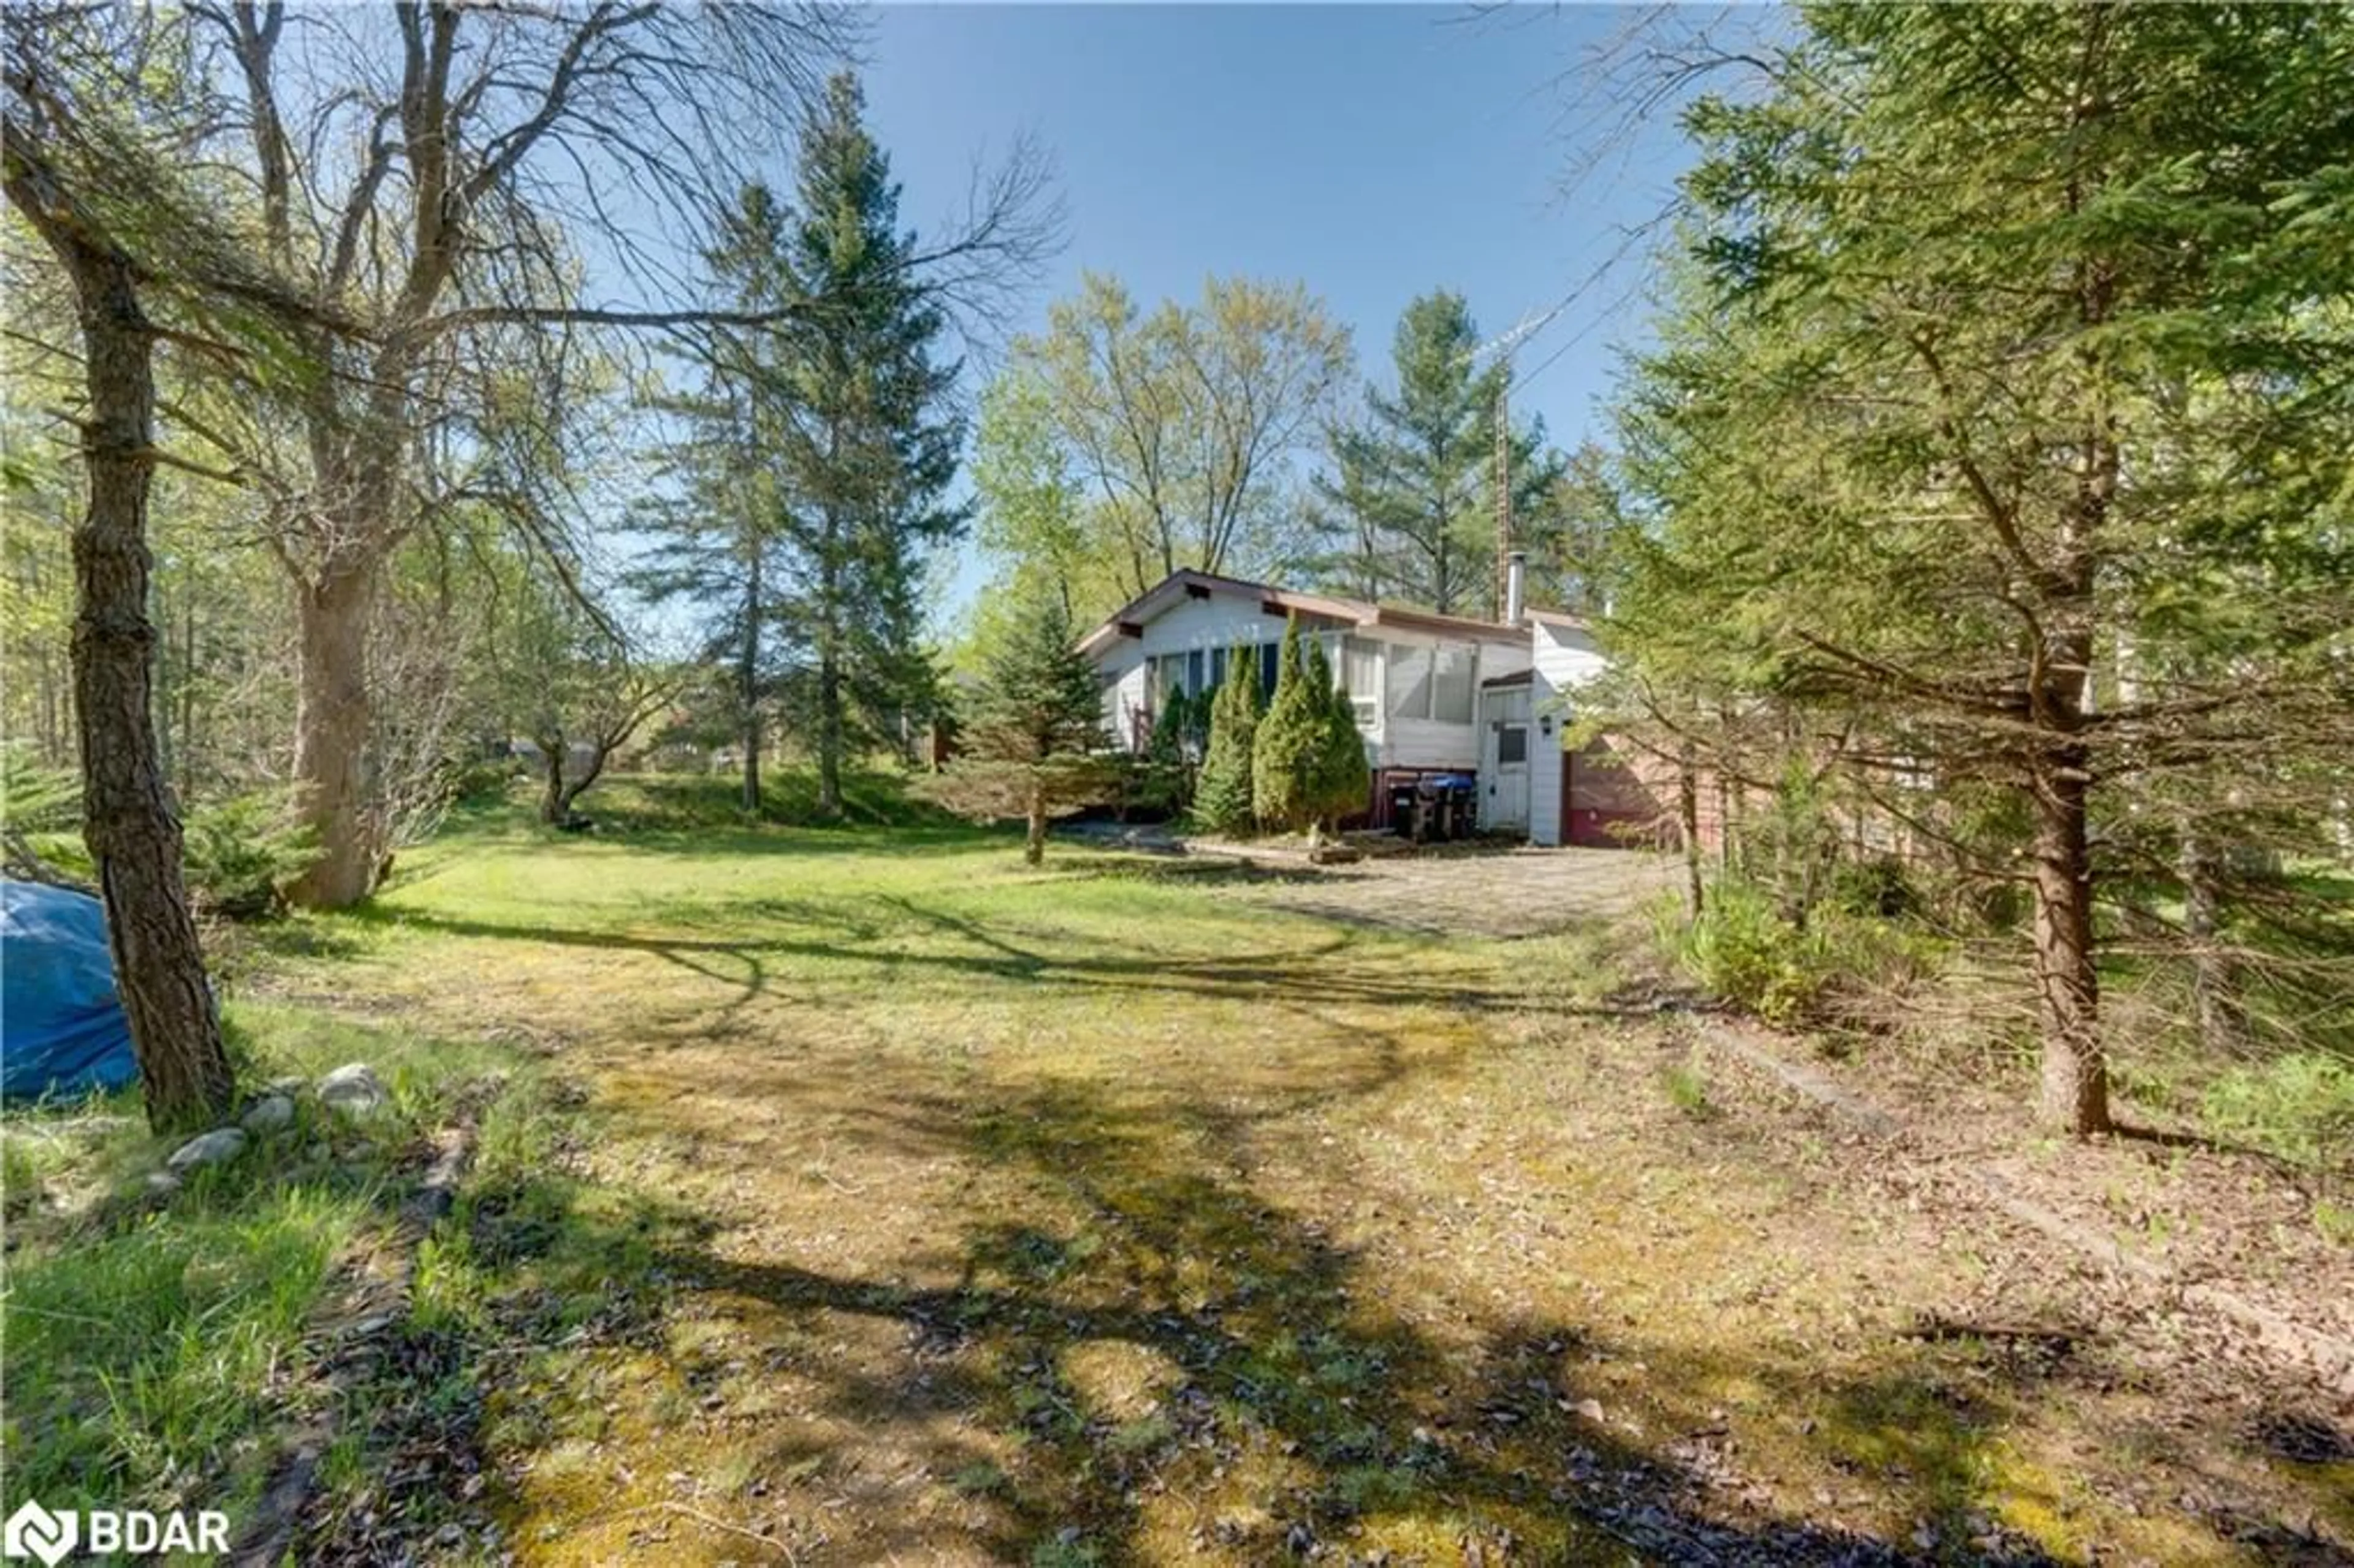 Cottage for 53 & 57 Bass Bay Dr, Victoria Harbour Ontario L0K 2A0